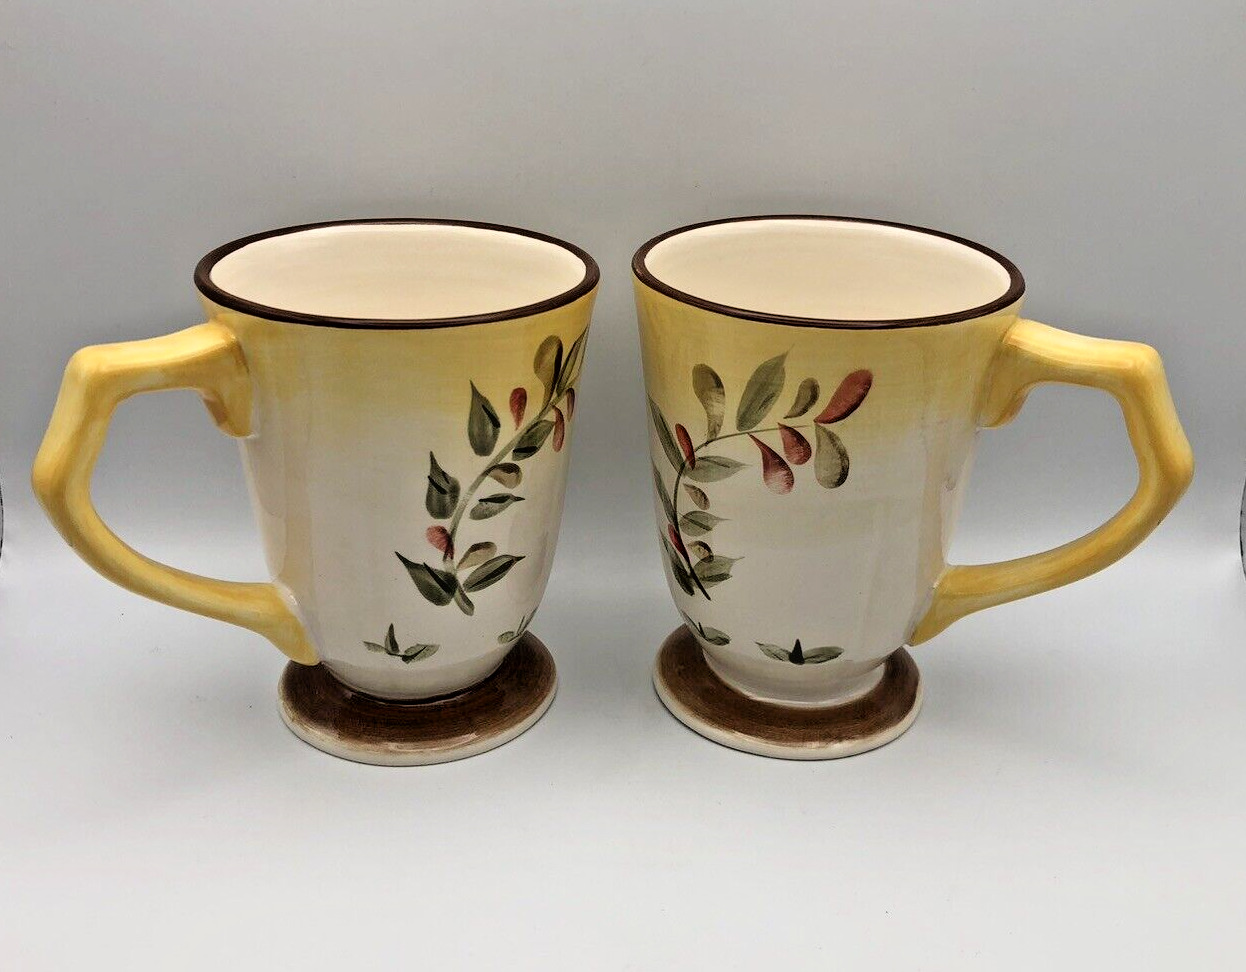 BETTER HOMES AND GARDENS TUSCAN RETREAT FOOTED COFFEE MUGS 13 oz EUC (Set of 2)